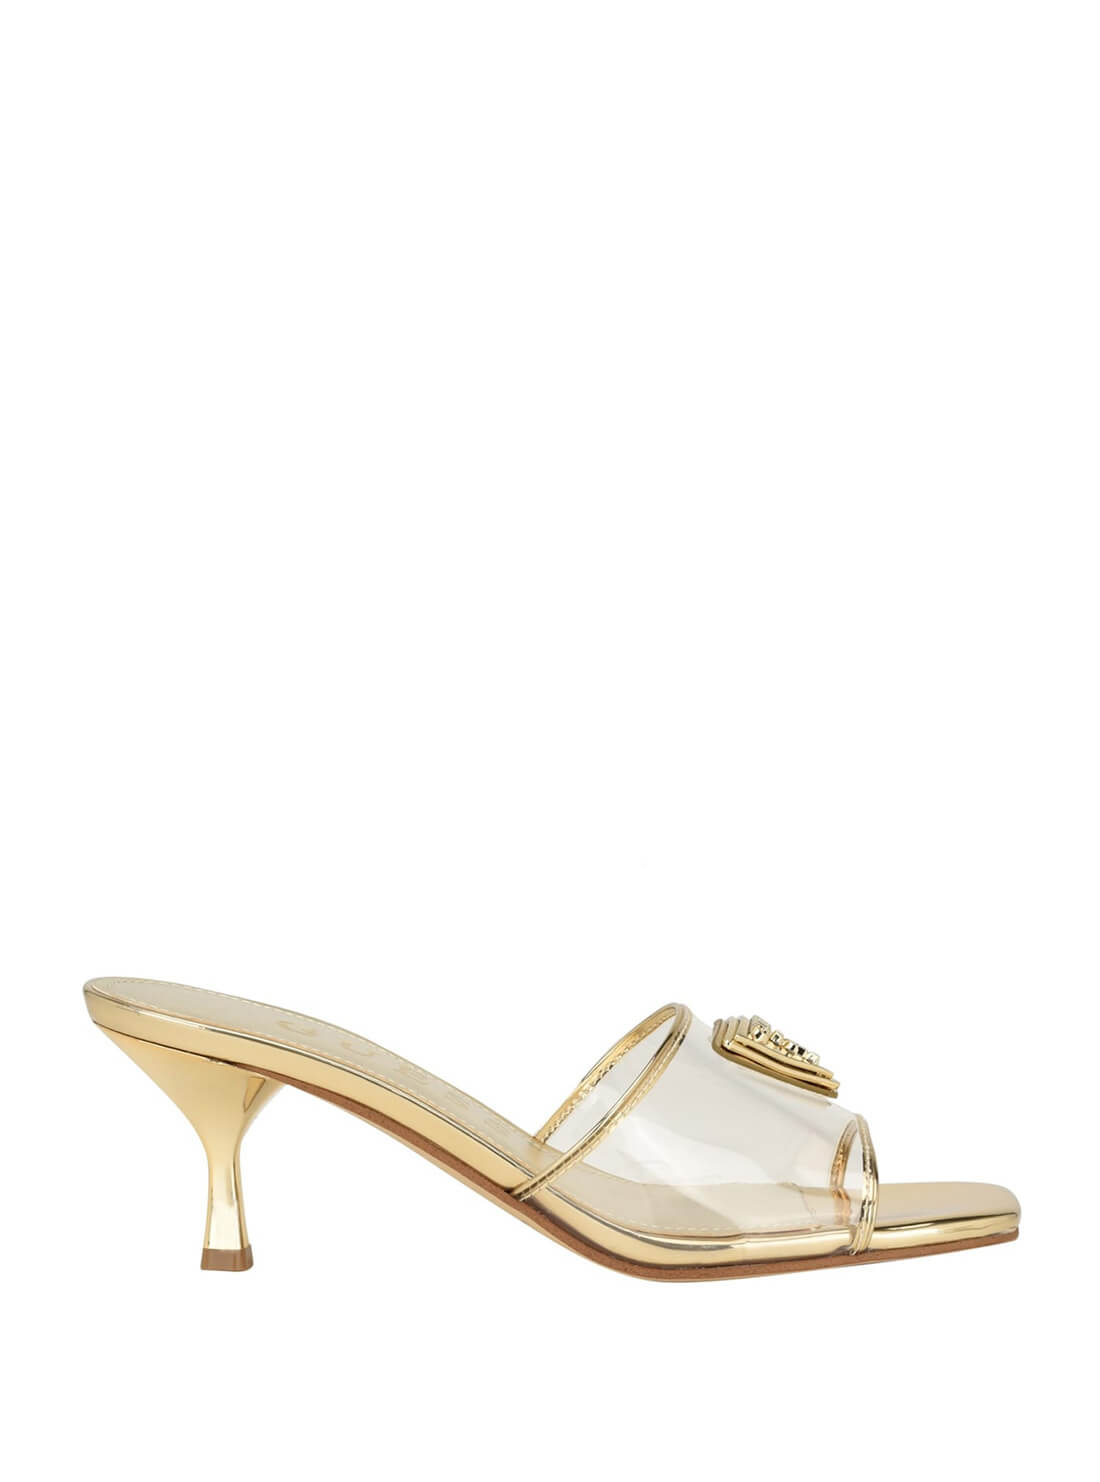 Gold Lusie Clear Kitten Heels | GUESS Women's Shoes | side view